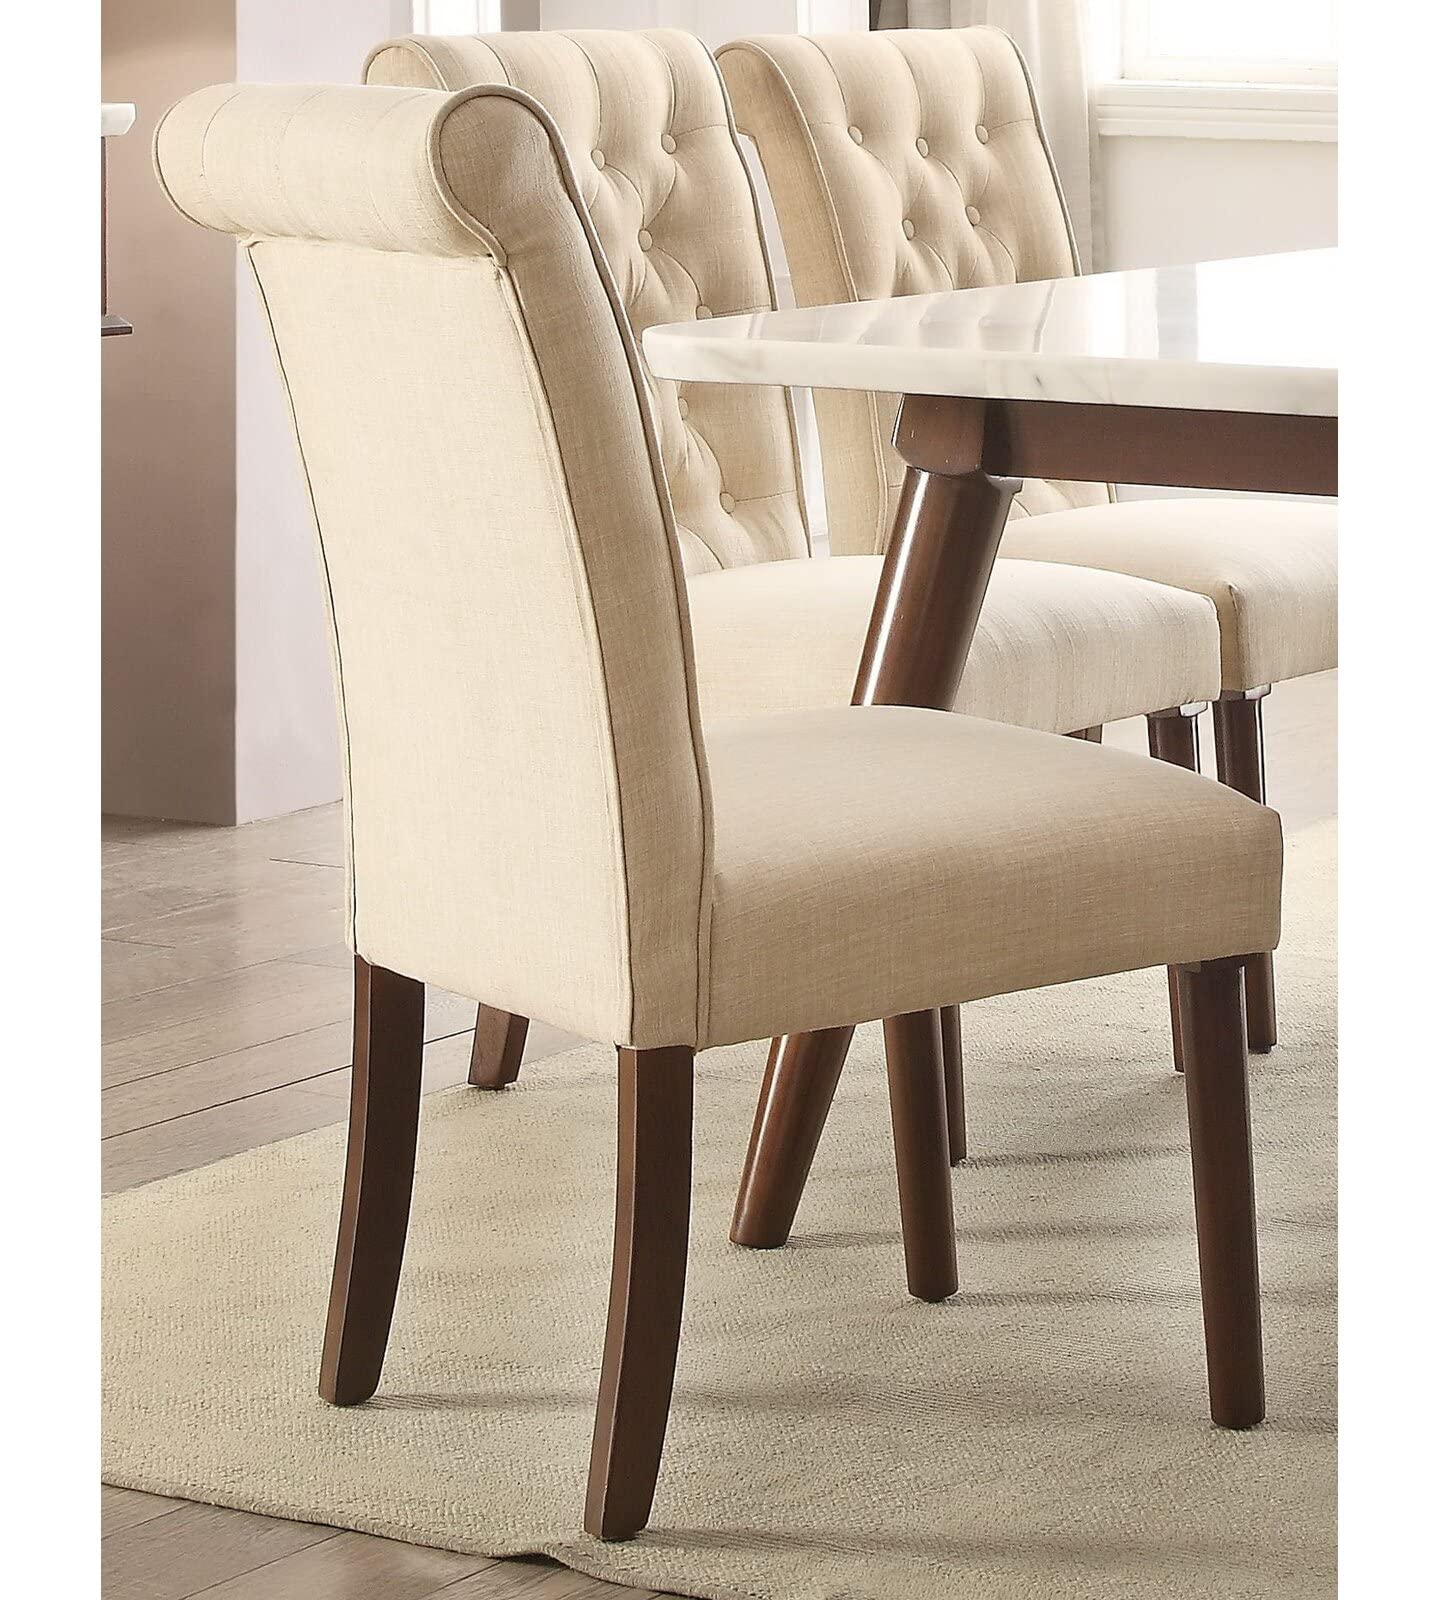 Hektor Upholstered Dining Chair, Overall Product Weight: 31 lb, Overall: 36.75'''' H x 19'''' W x 22'''...